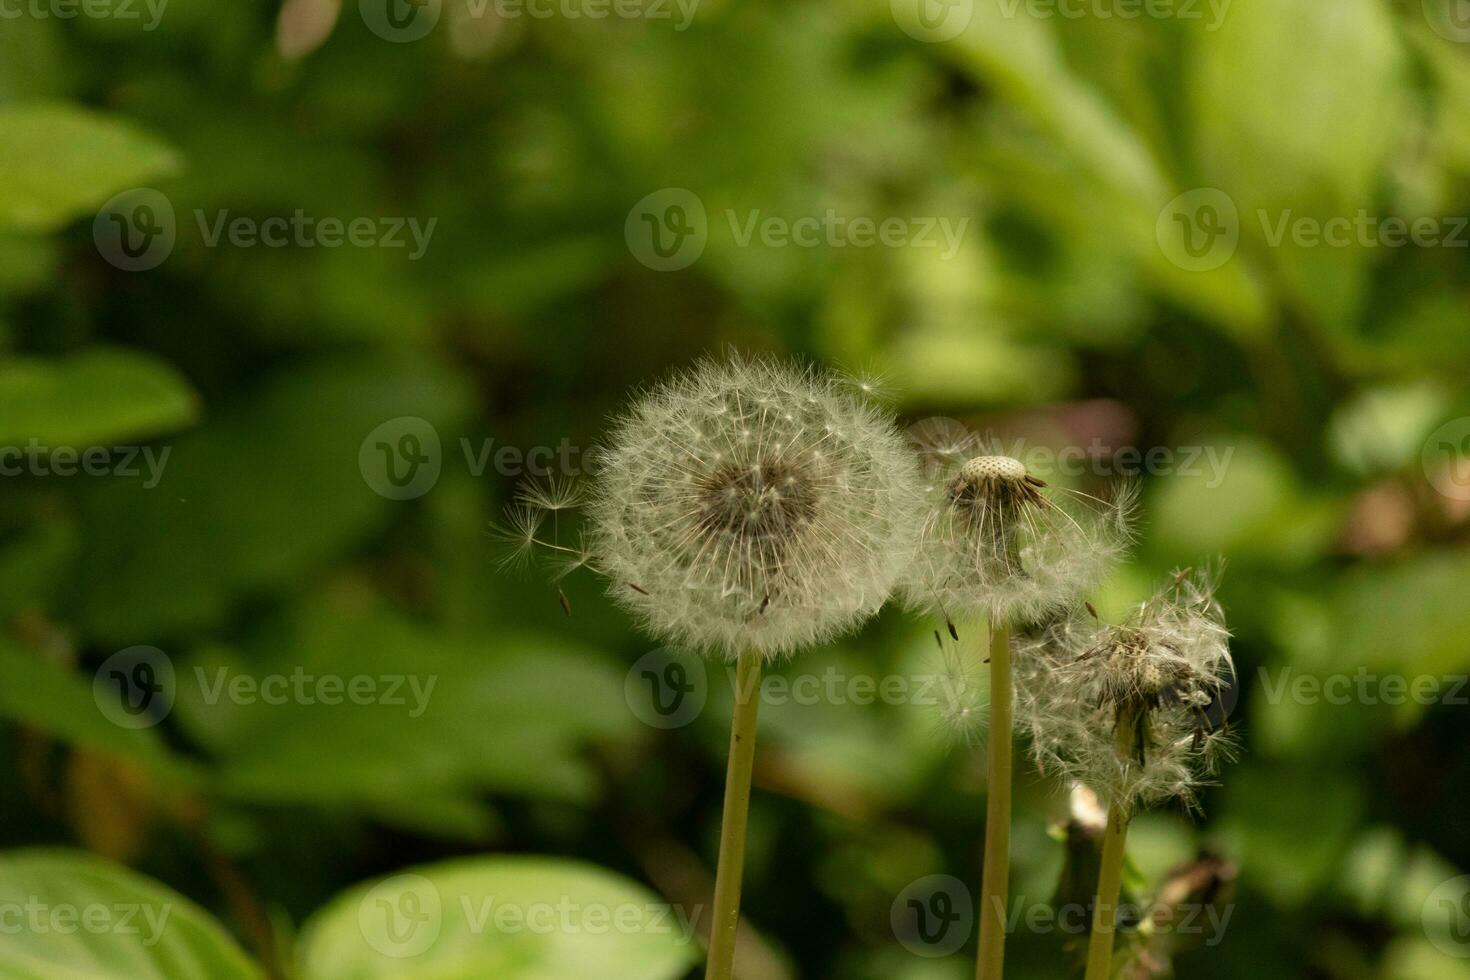 This beautiful dandelion seedpod was sitting in the middle of the yard among the grass. These blowballs are so pretty to see and help the flower disperse others around. photo